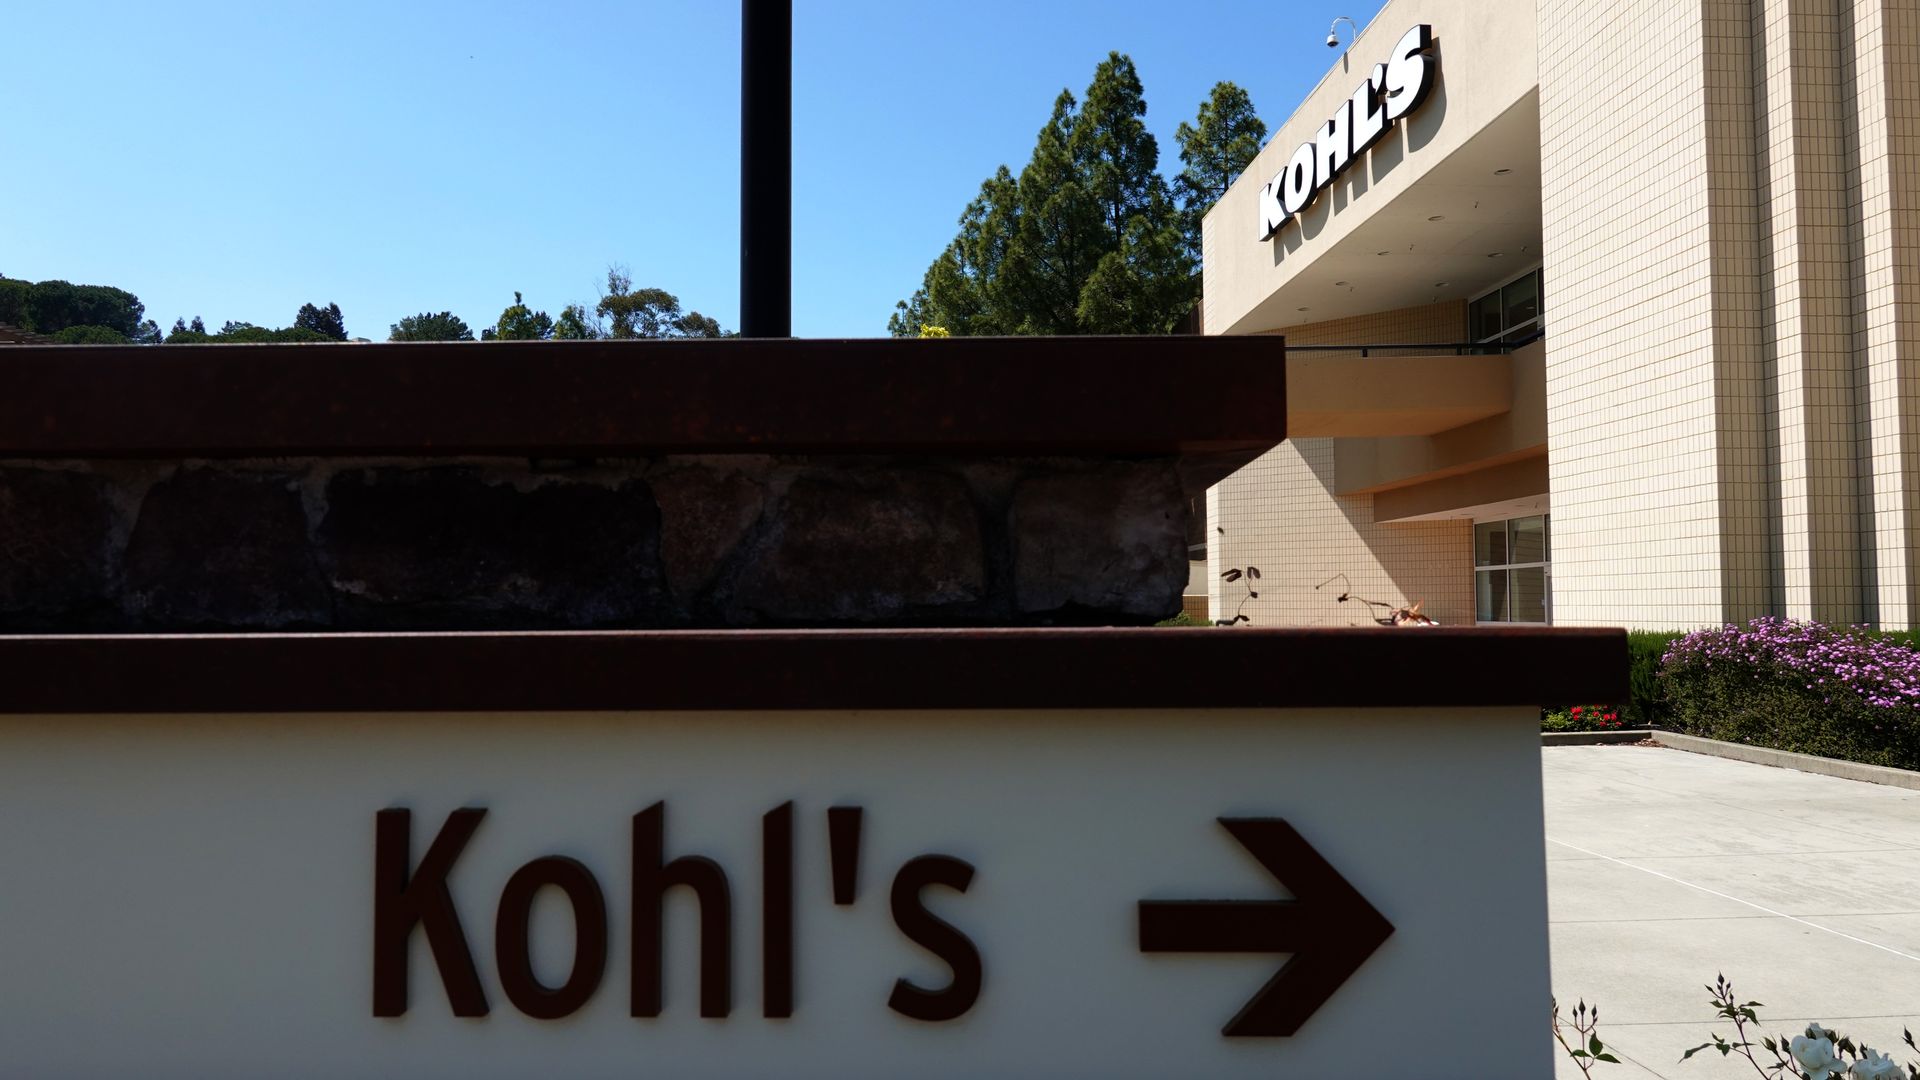 The Kohl's name is spelled out on the side of a building in brown lettering alongside an arrow pointing to the right.